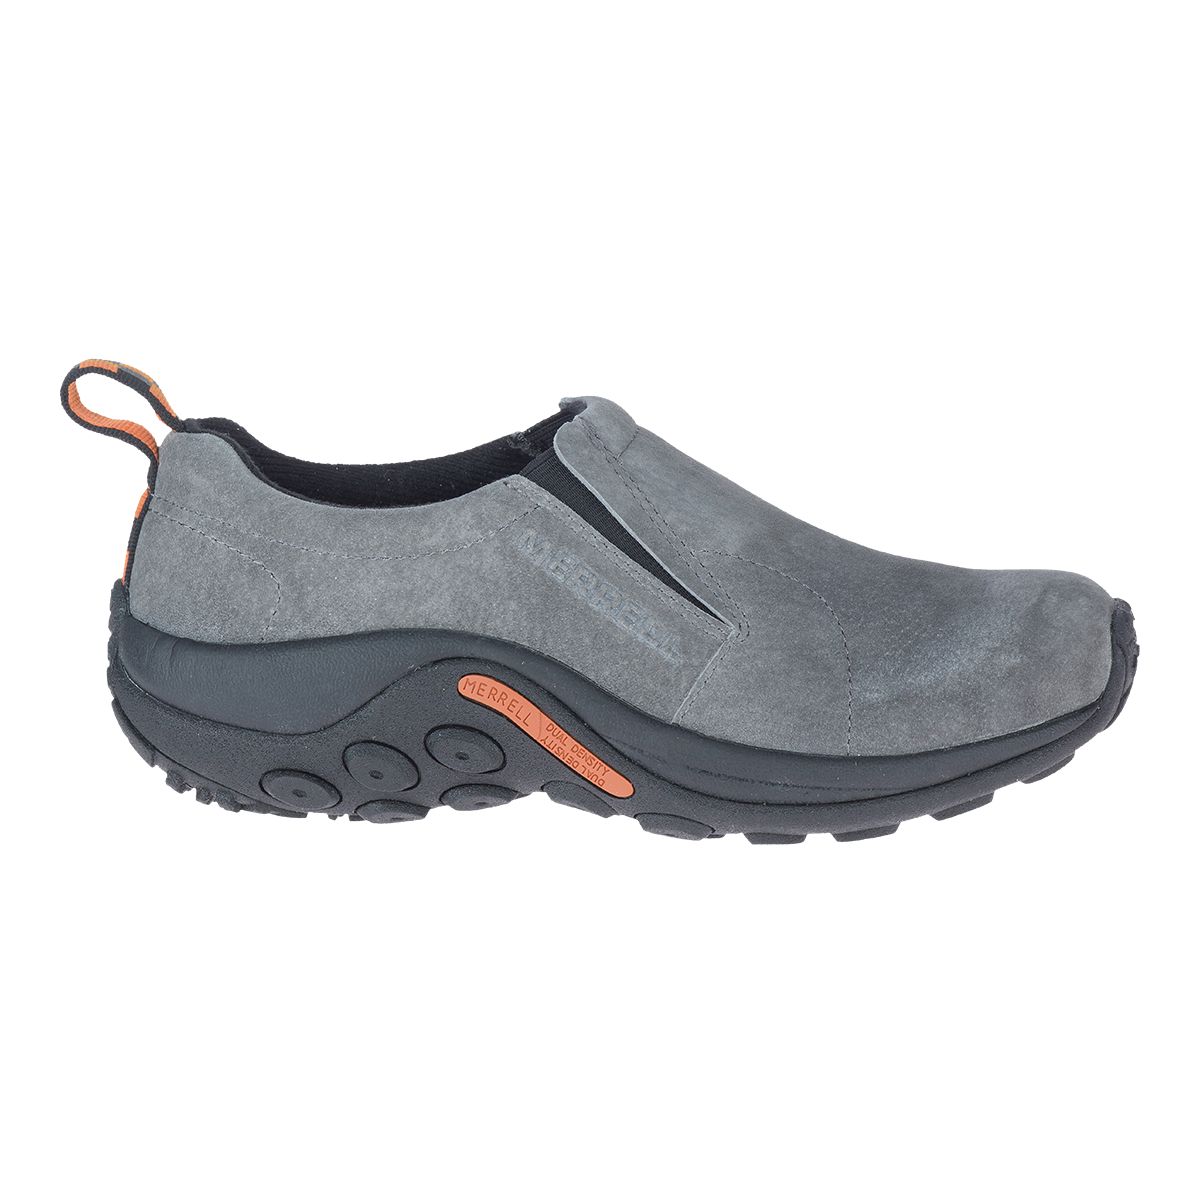 Image of Merrell Women's Jungle Moc Shoes Slip On Suede